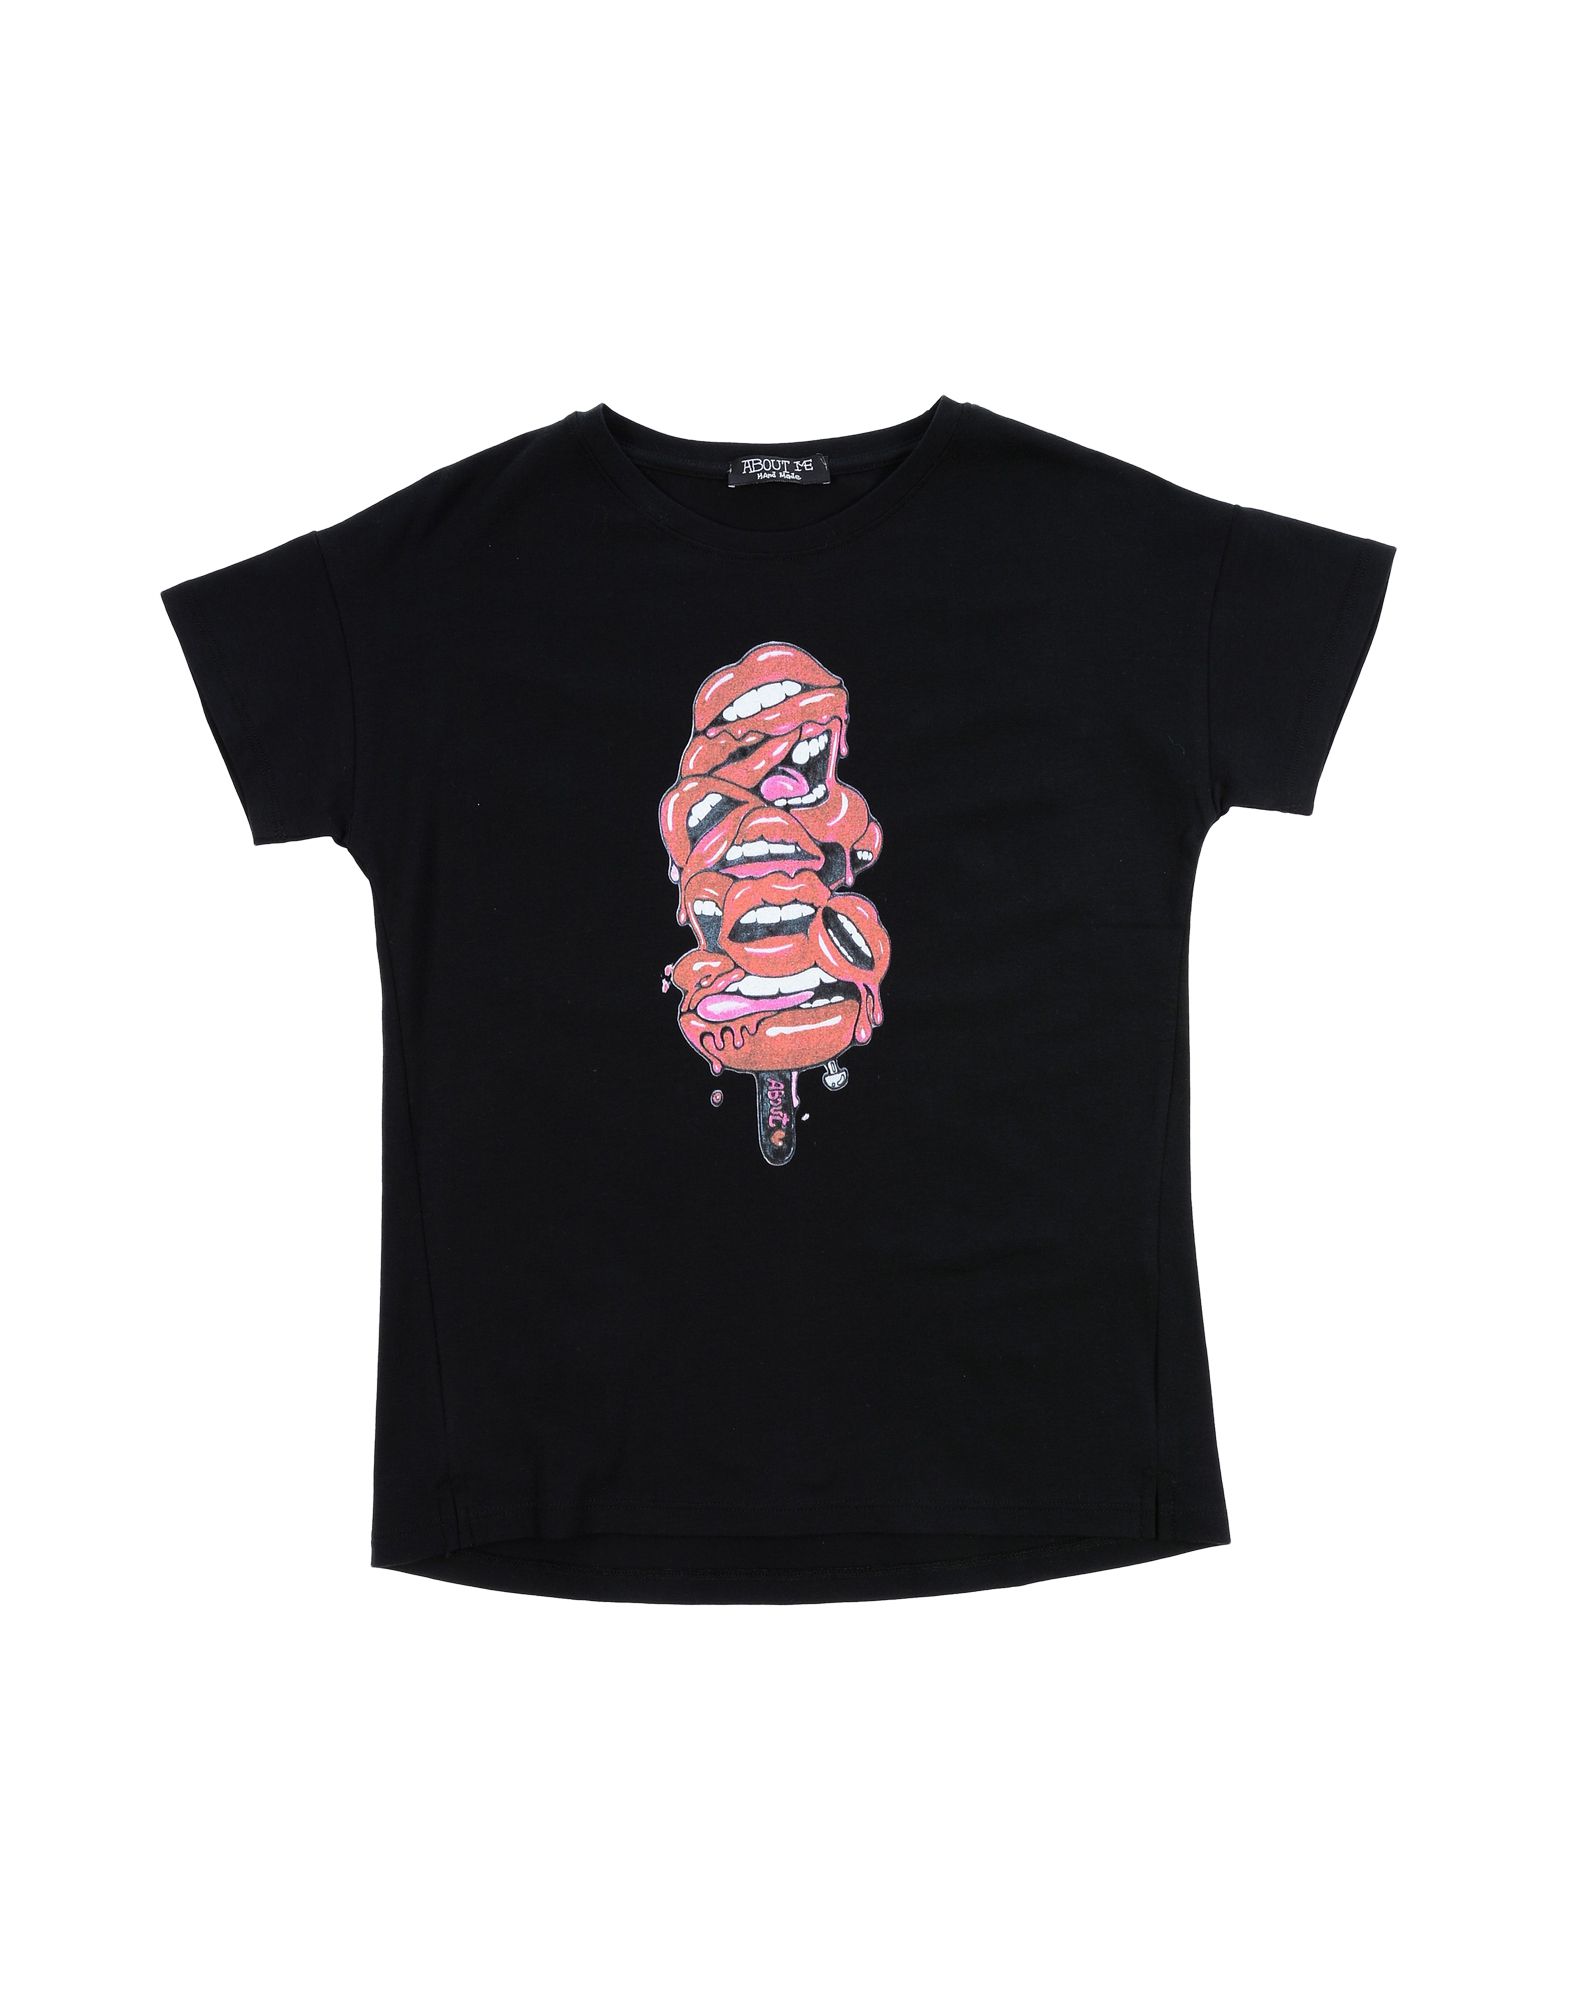 About Me Handmade Kids' T-shirts In Black